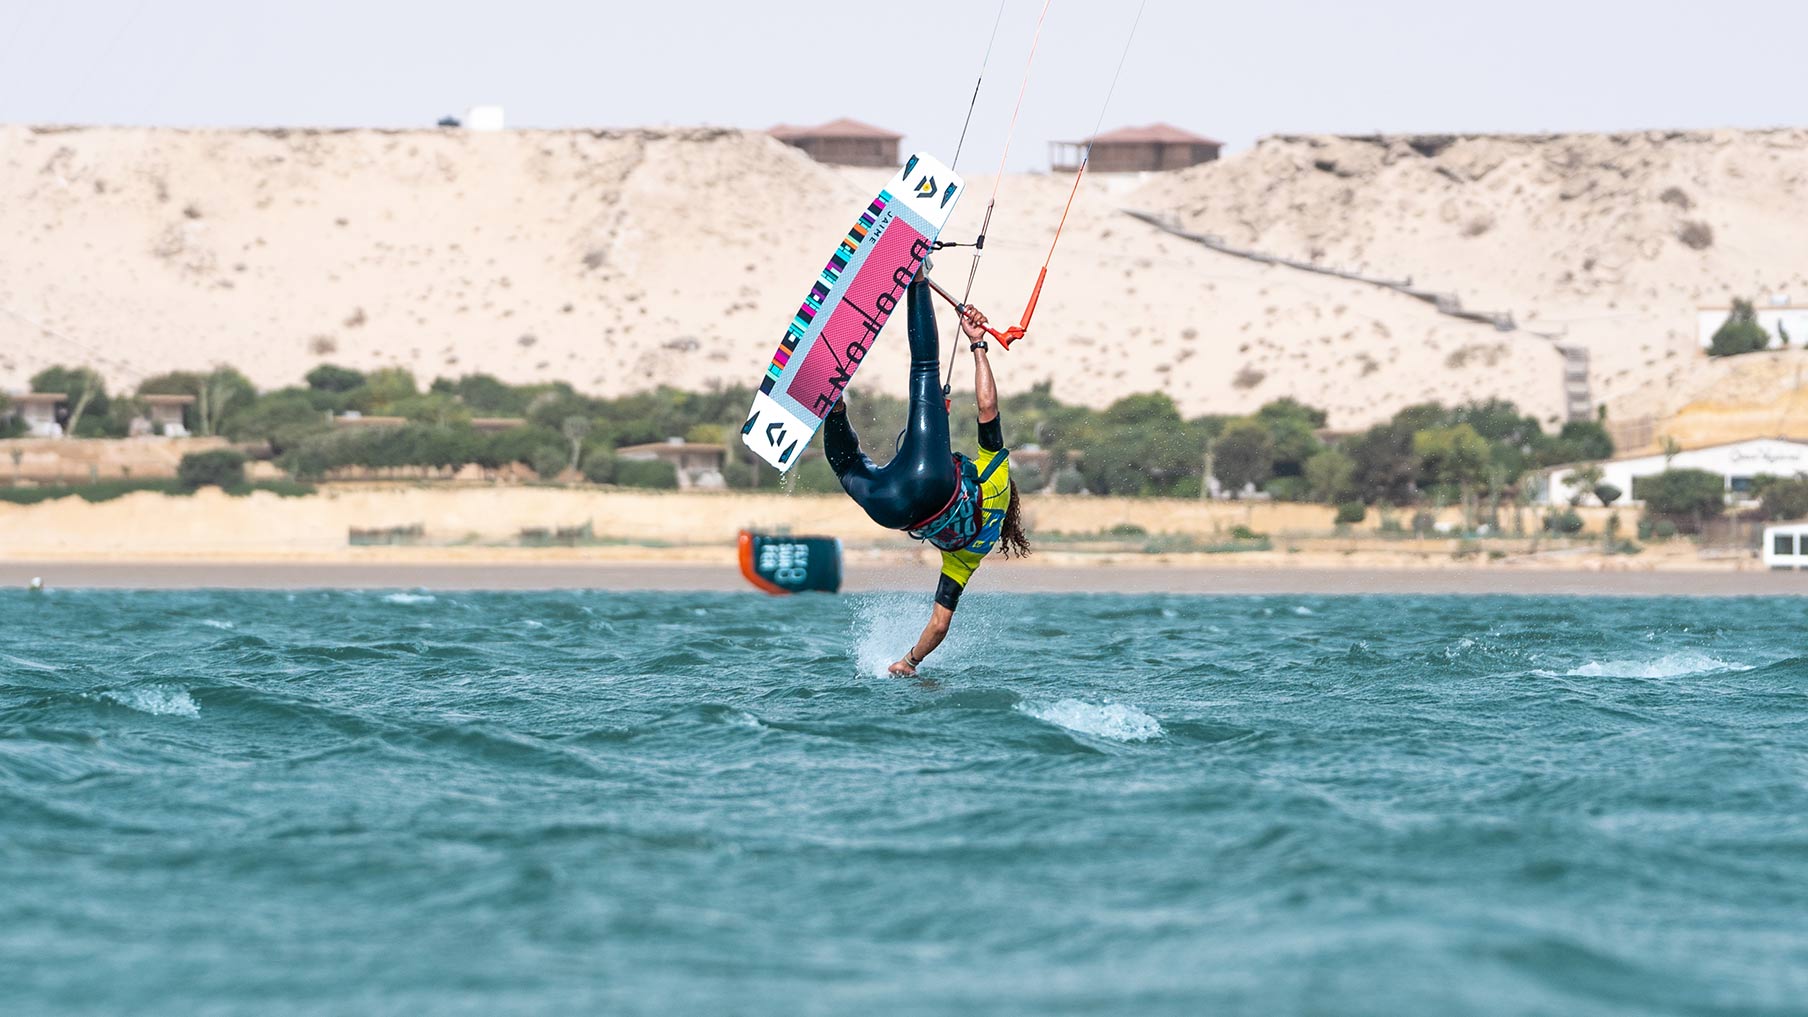 kitesurfer doing a trick and he is touching the water with his hand